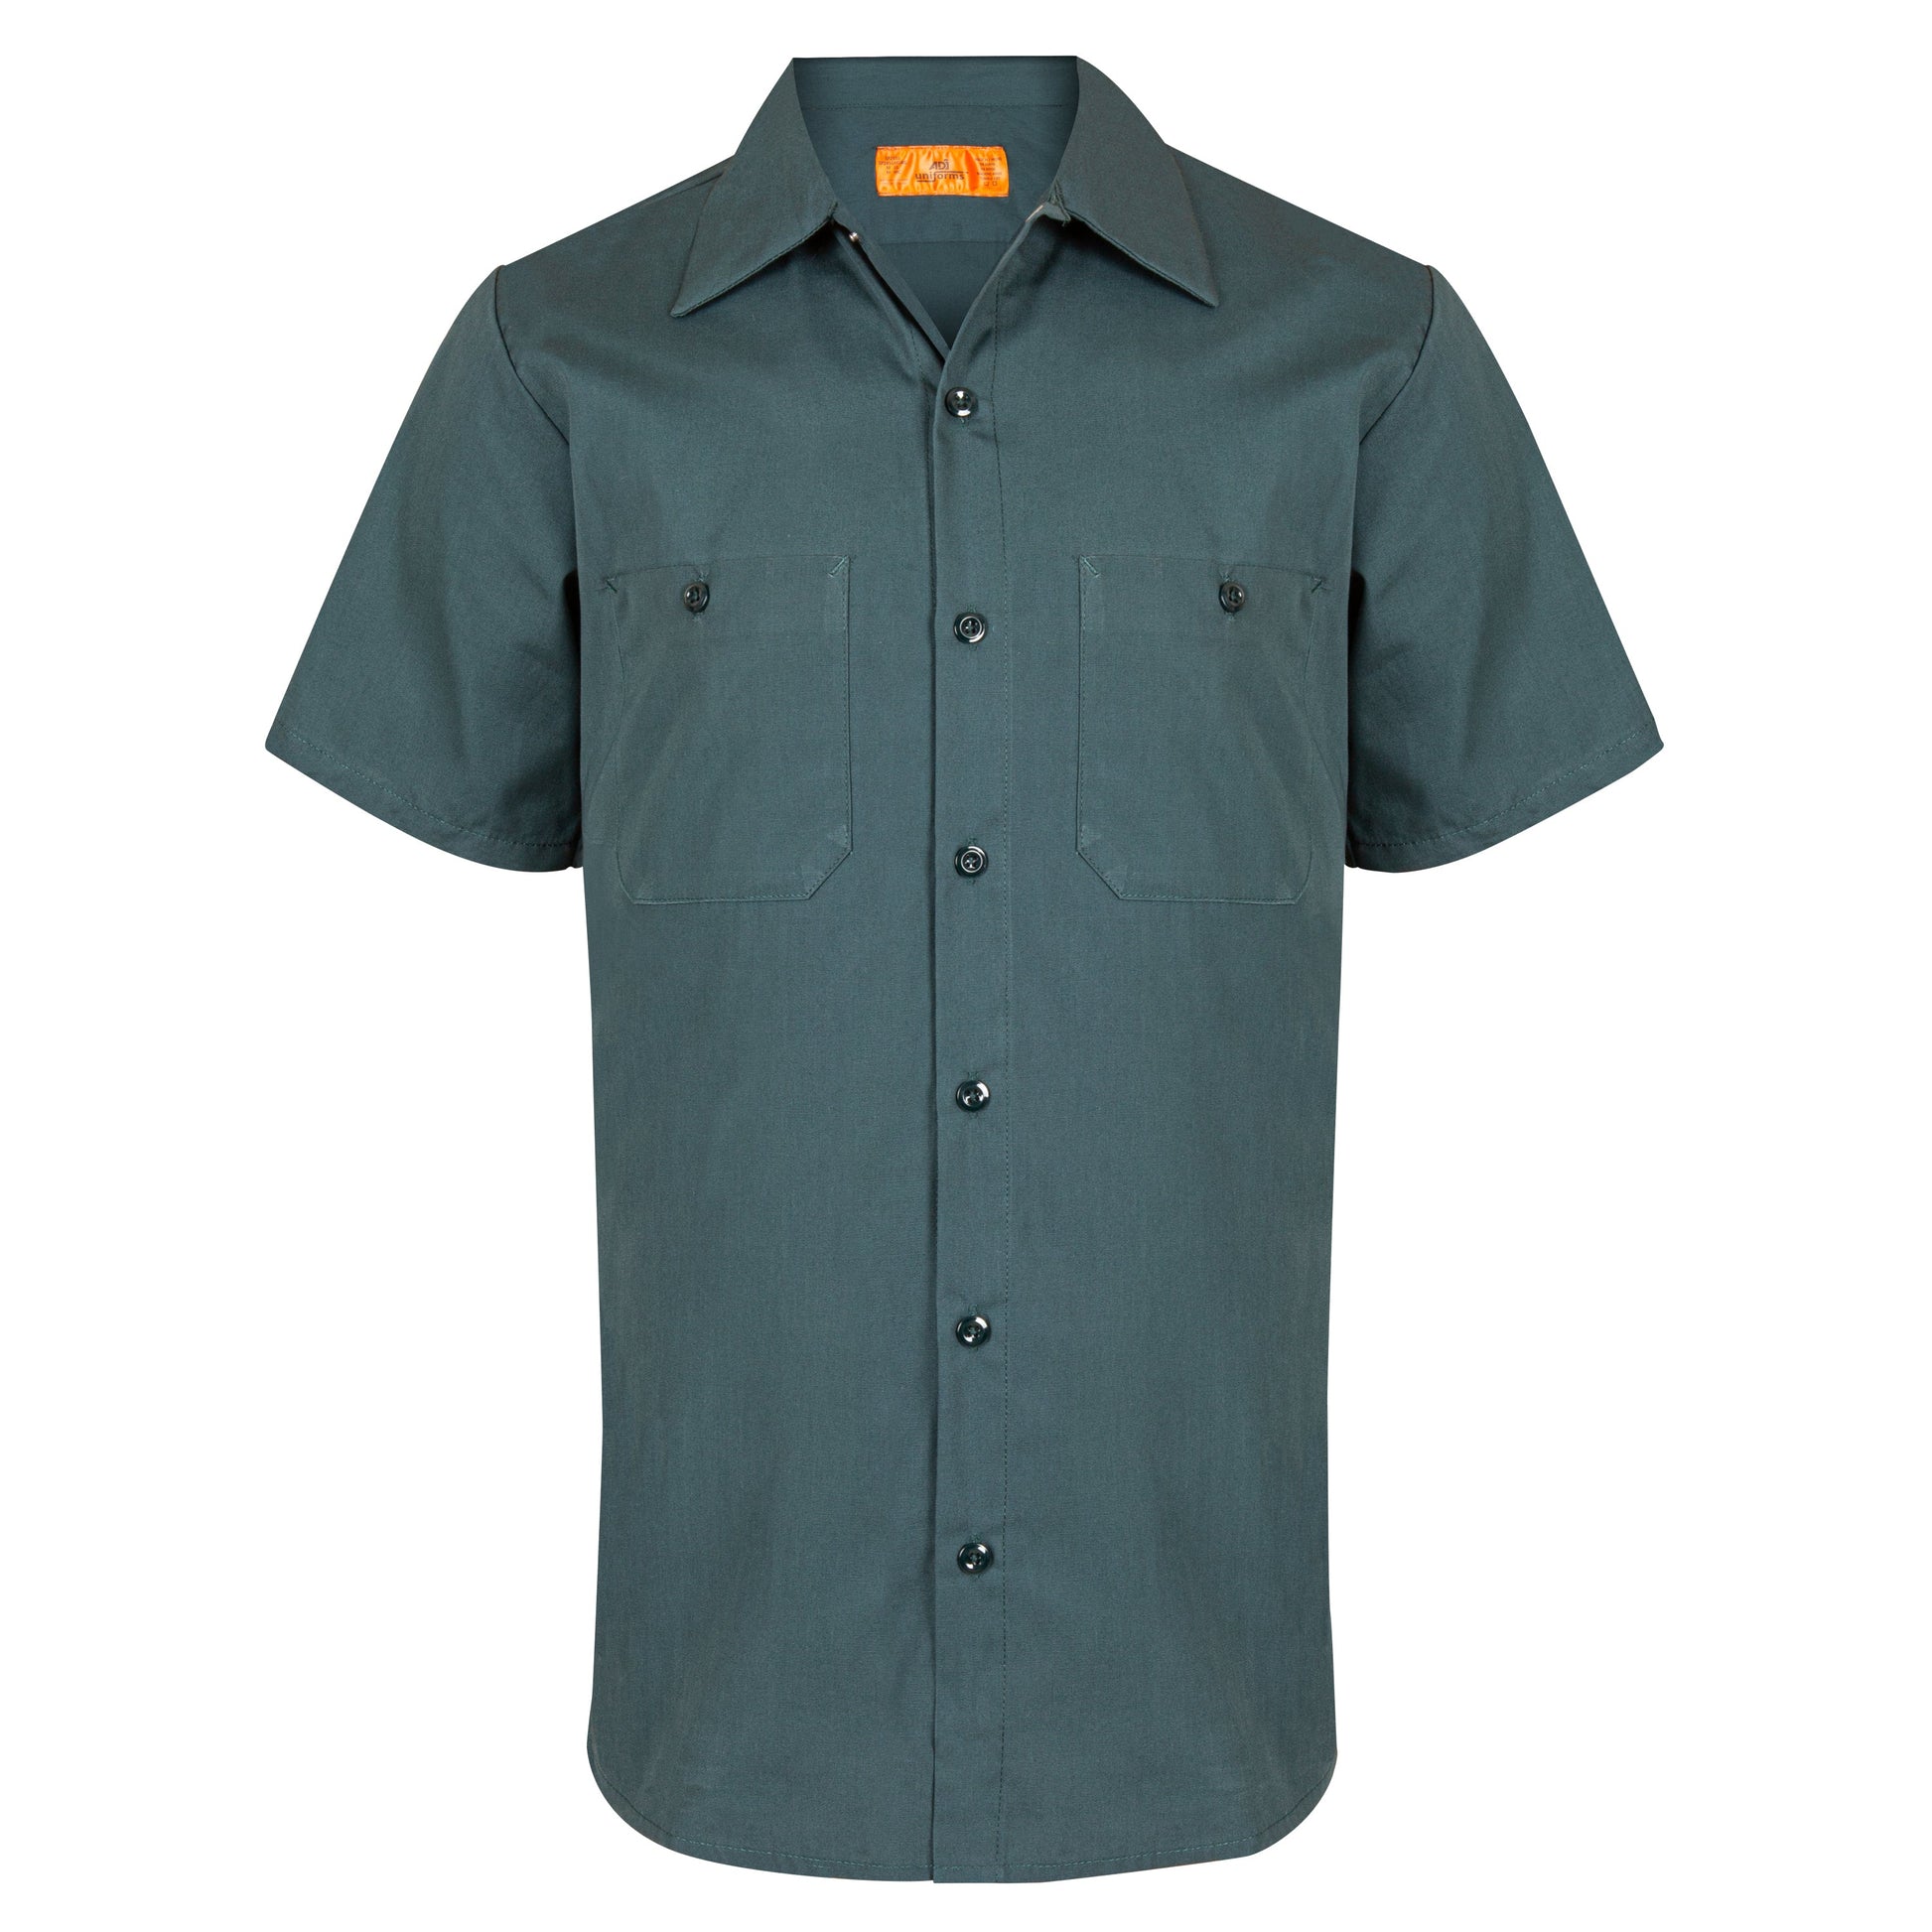 American Dawn | 2X-Large Spruce Green Work Shirt With Short Sleeves And 2 Pockets